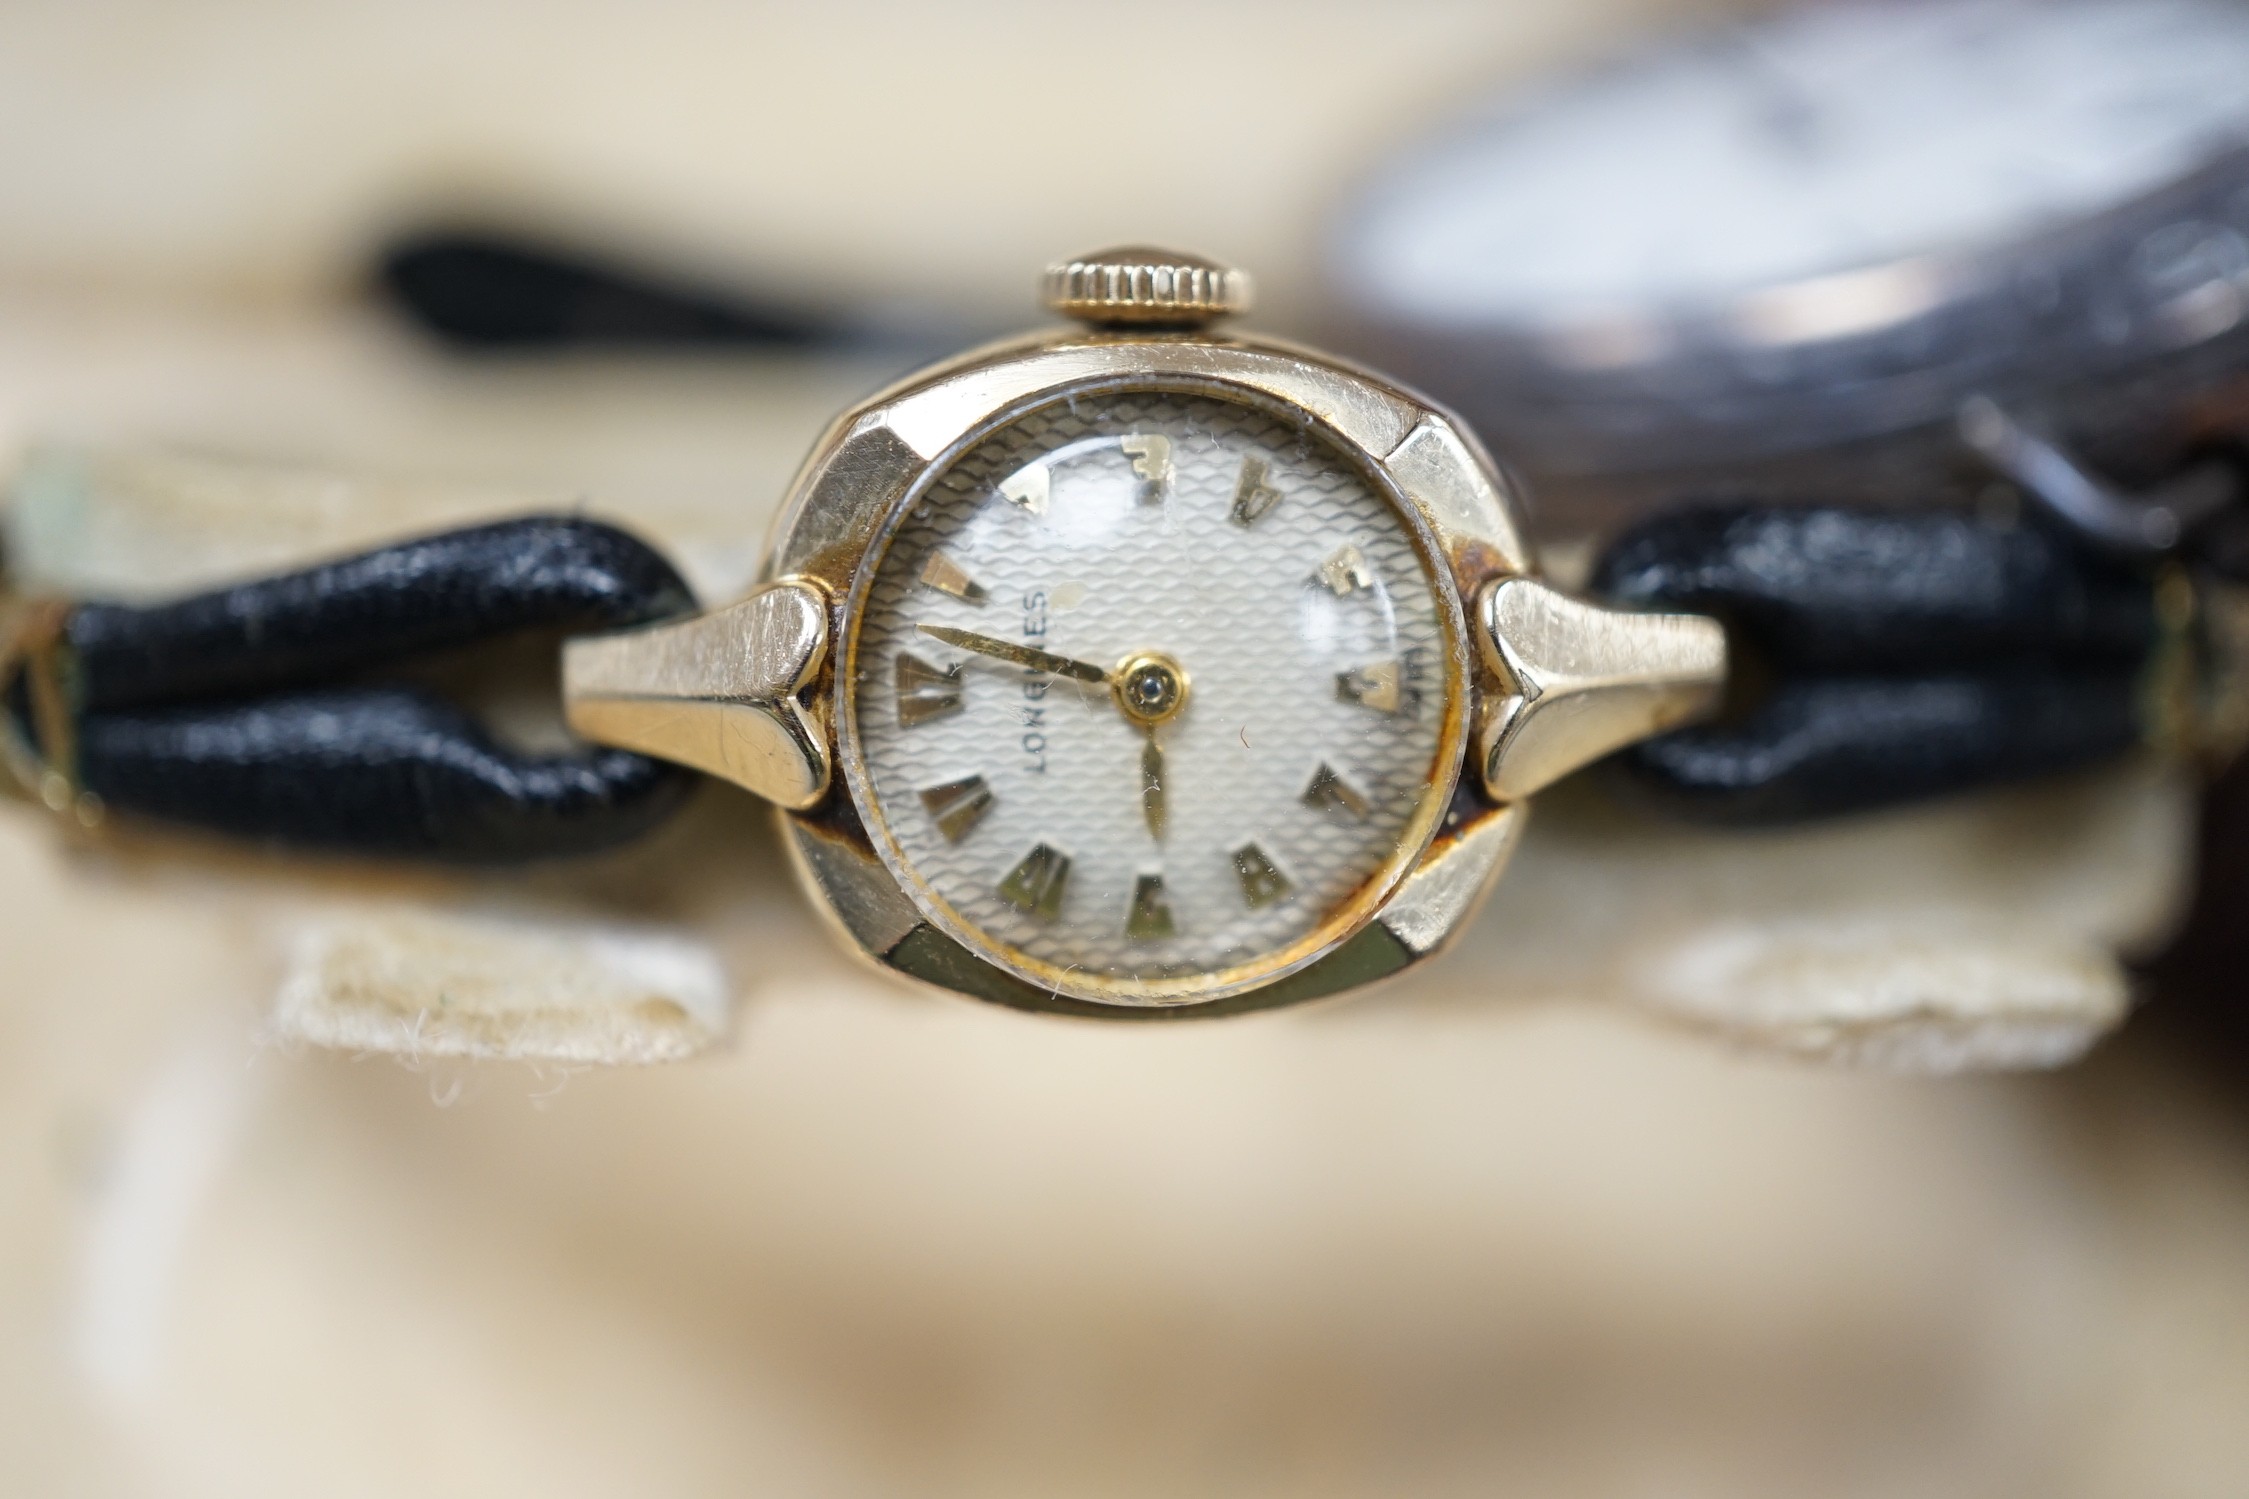 A lady's 10k gold filled Longines wrist watch, original box, a gold plated fob watch and a silver watch.